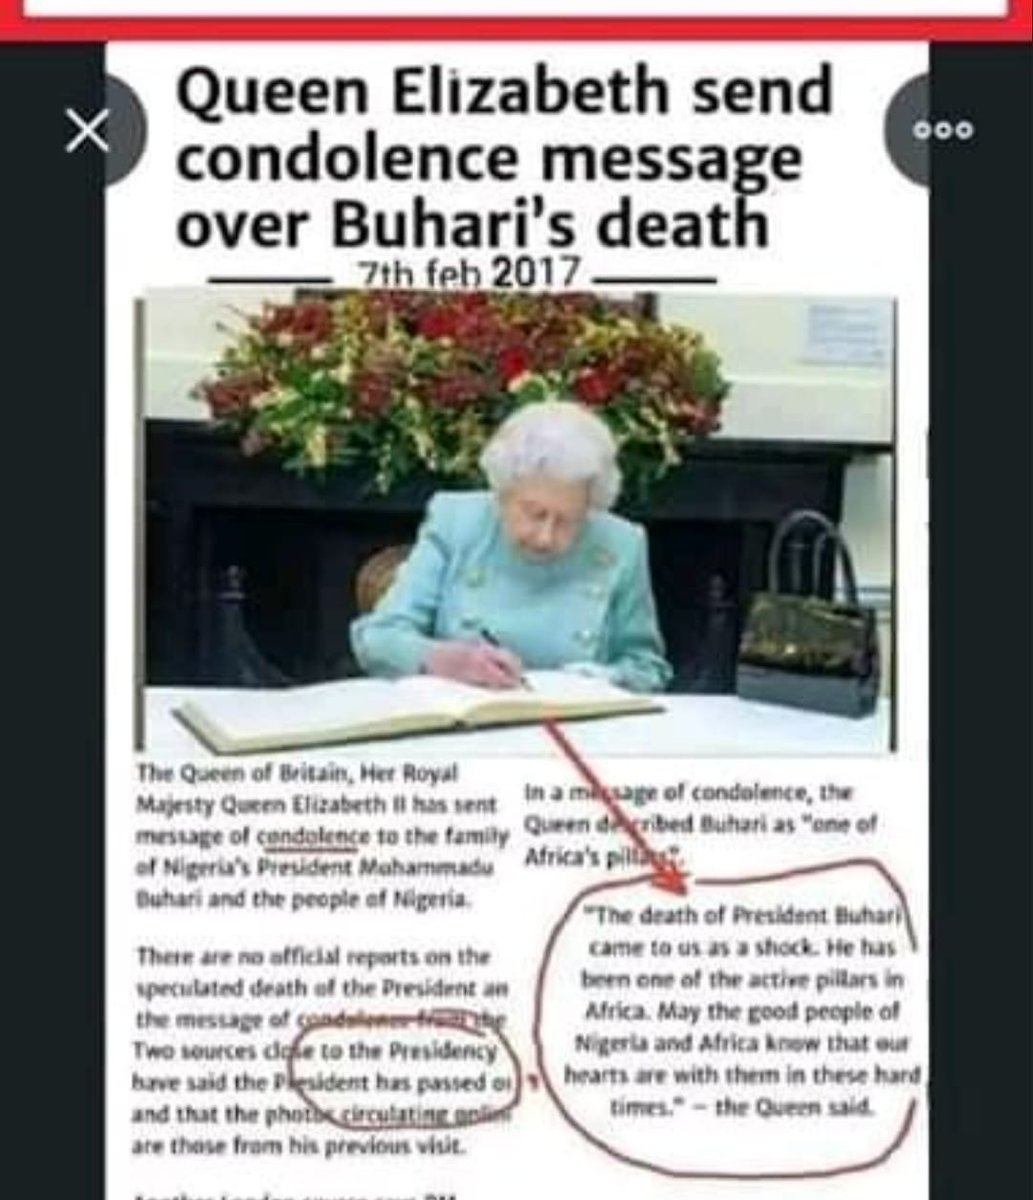 @anna_lrig @biafra4ever @hopahop @FreakyWikileaks @thewoman28 @good_retweet @Titte24 @celebrities_vip @Alicia26Good @Nig_Newspapers @helpingpoorppl @ade_sobowale85 @AsiwajuTinubu @MBuhari @NGRPresident @GovNigeria Did you notice the wrong English in the fake article that Emeka and mad Okwu are spreading on Twitter? It says 'Queen Elizabeth send'(S) condolence message over Buhari's death. This shows that it was written by one of the half-educated IPOB fools.